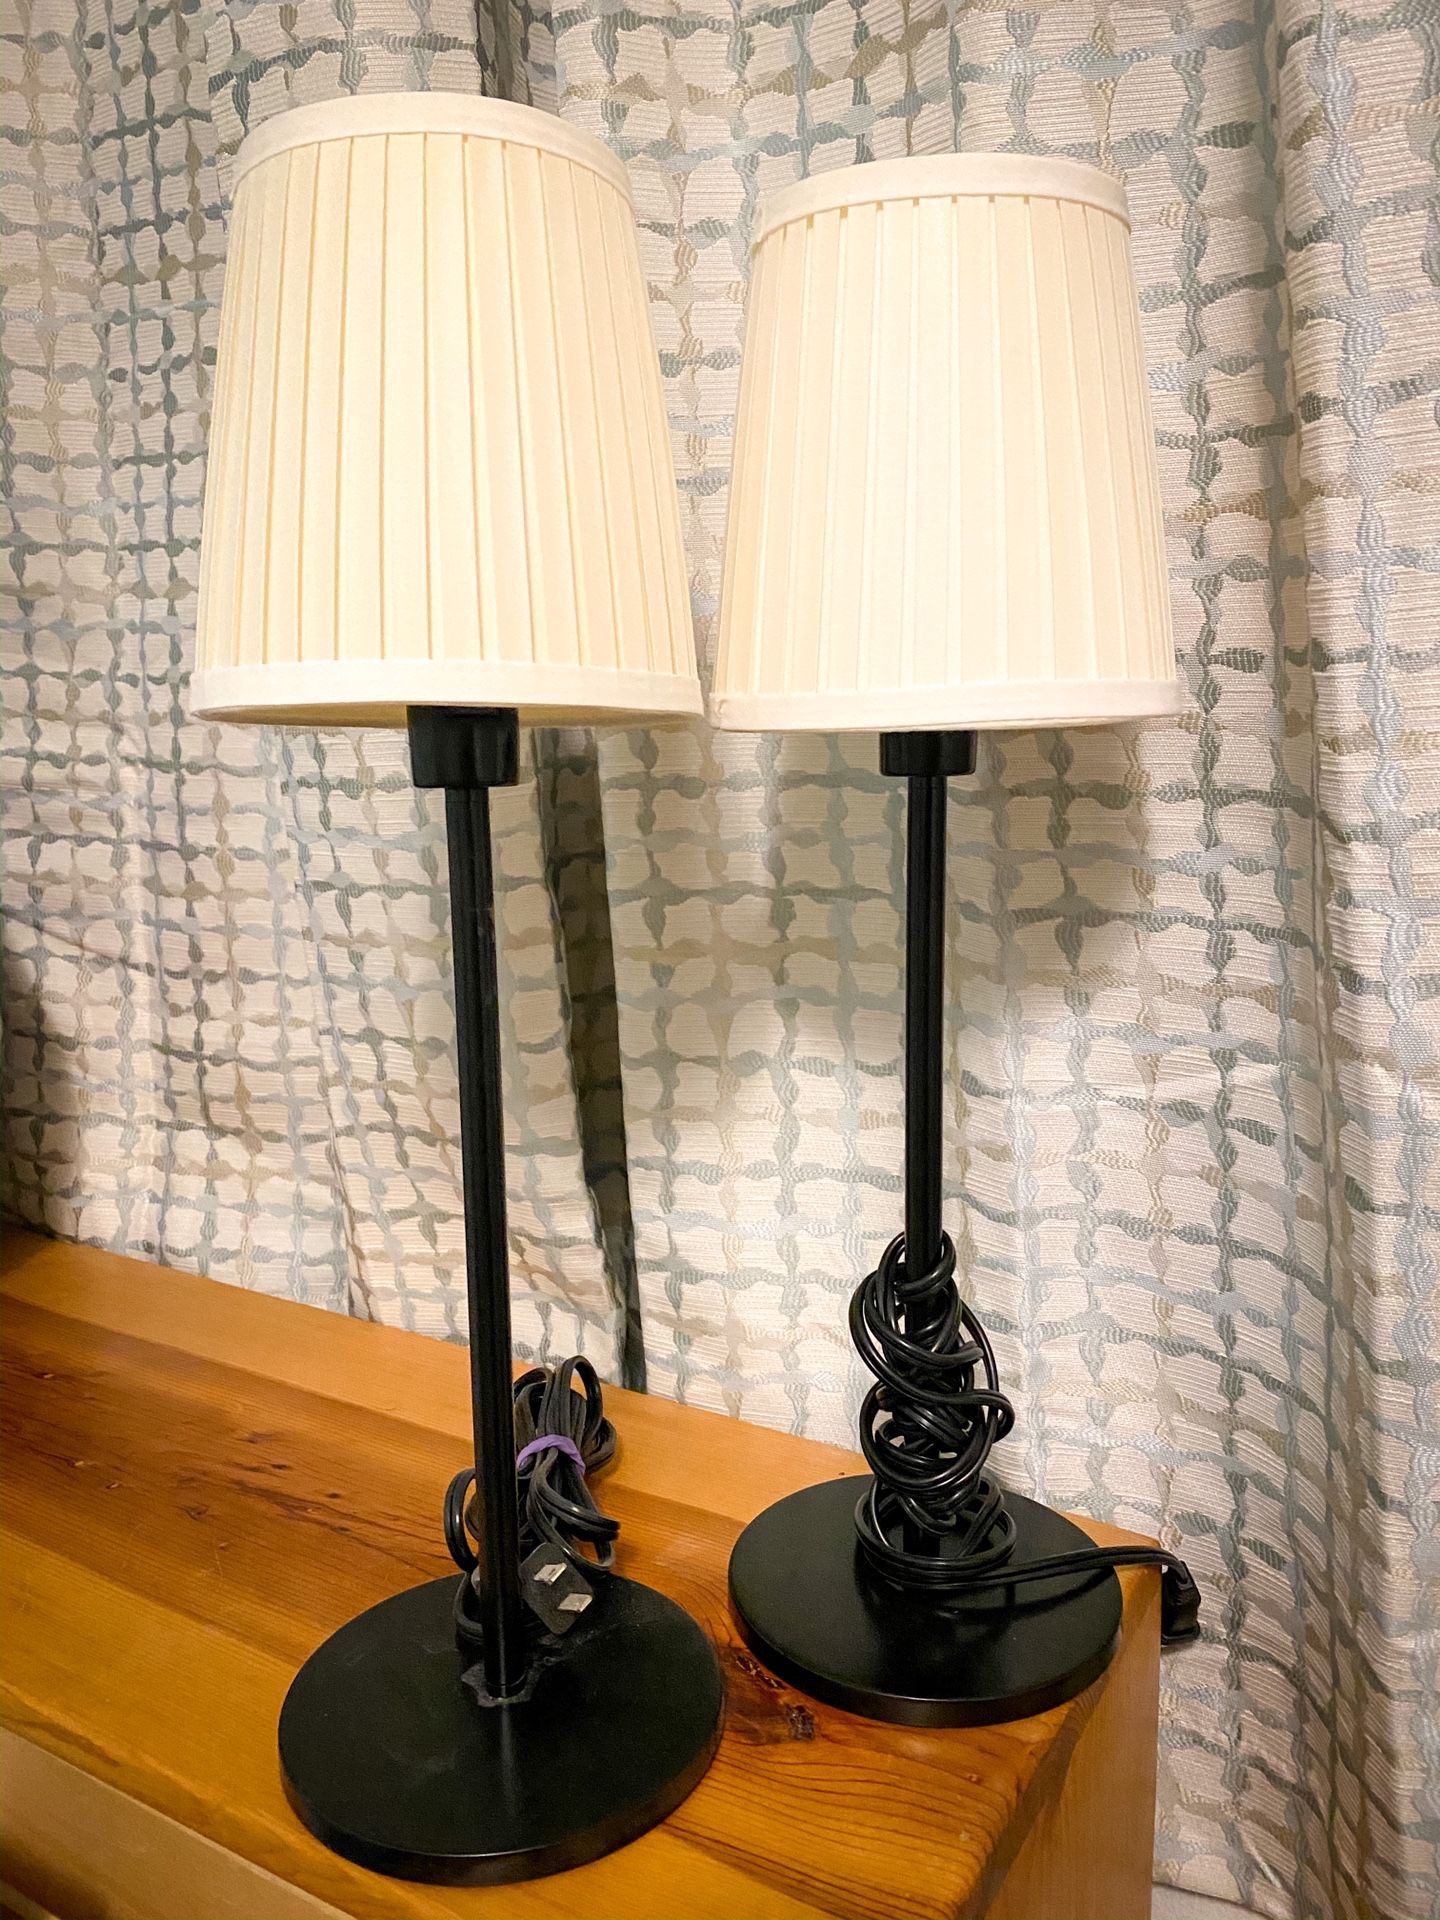 2 Table Lamps Barely Used